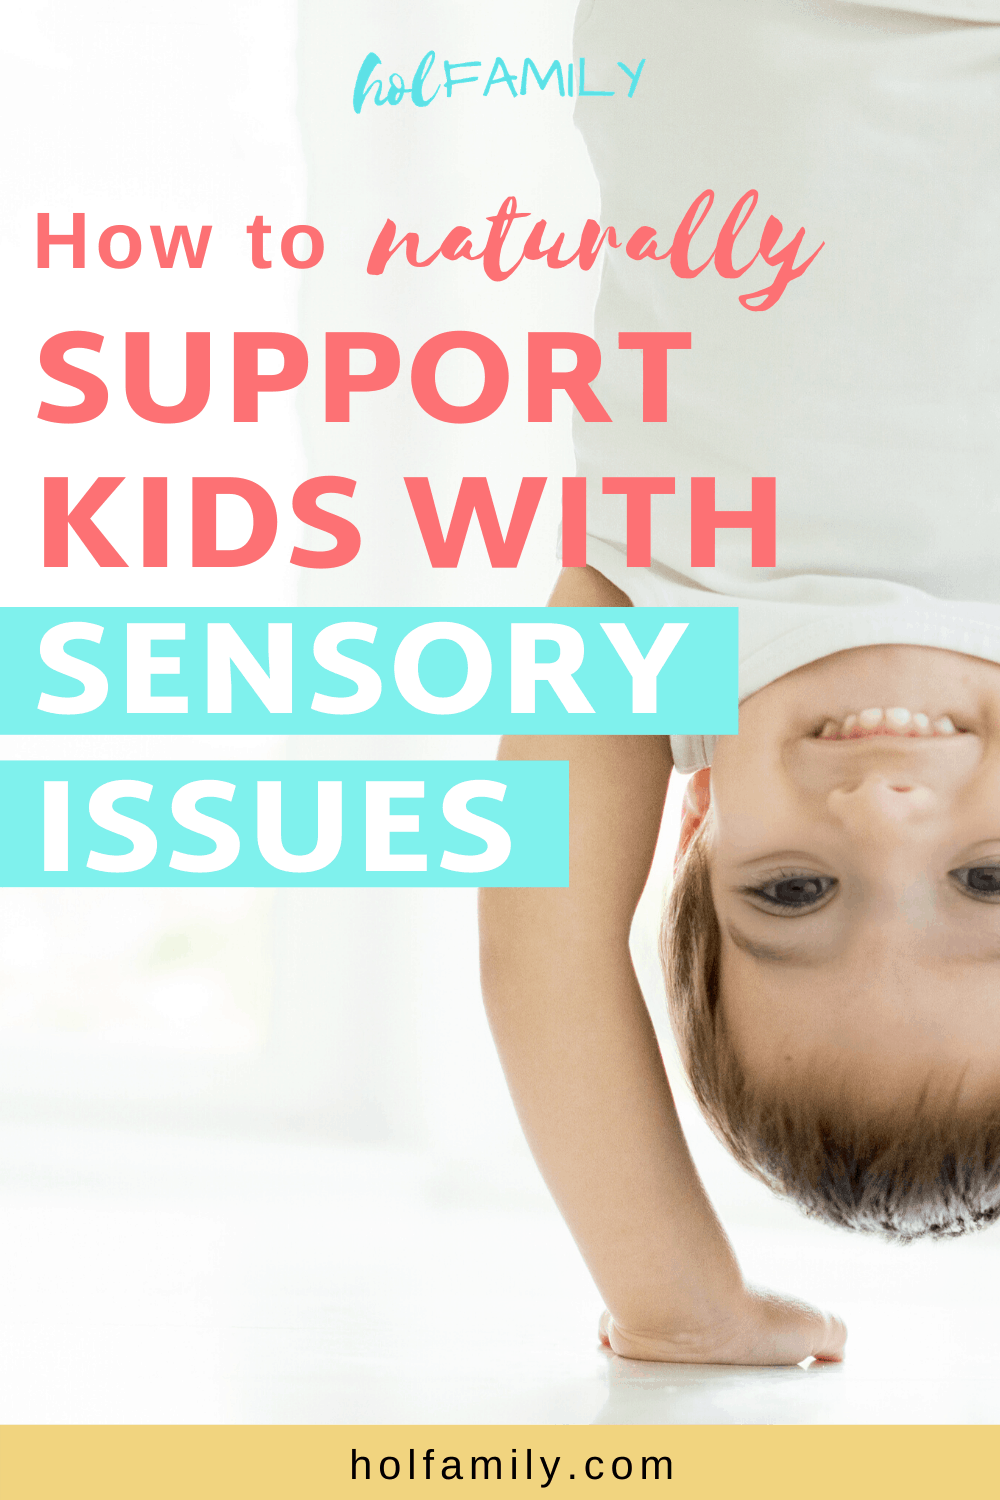 How to help Sensory issues in kids